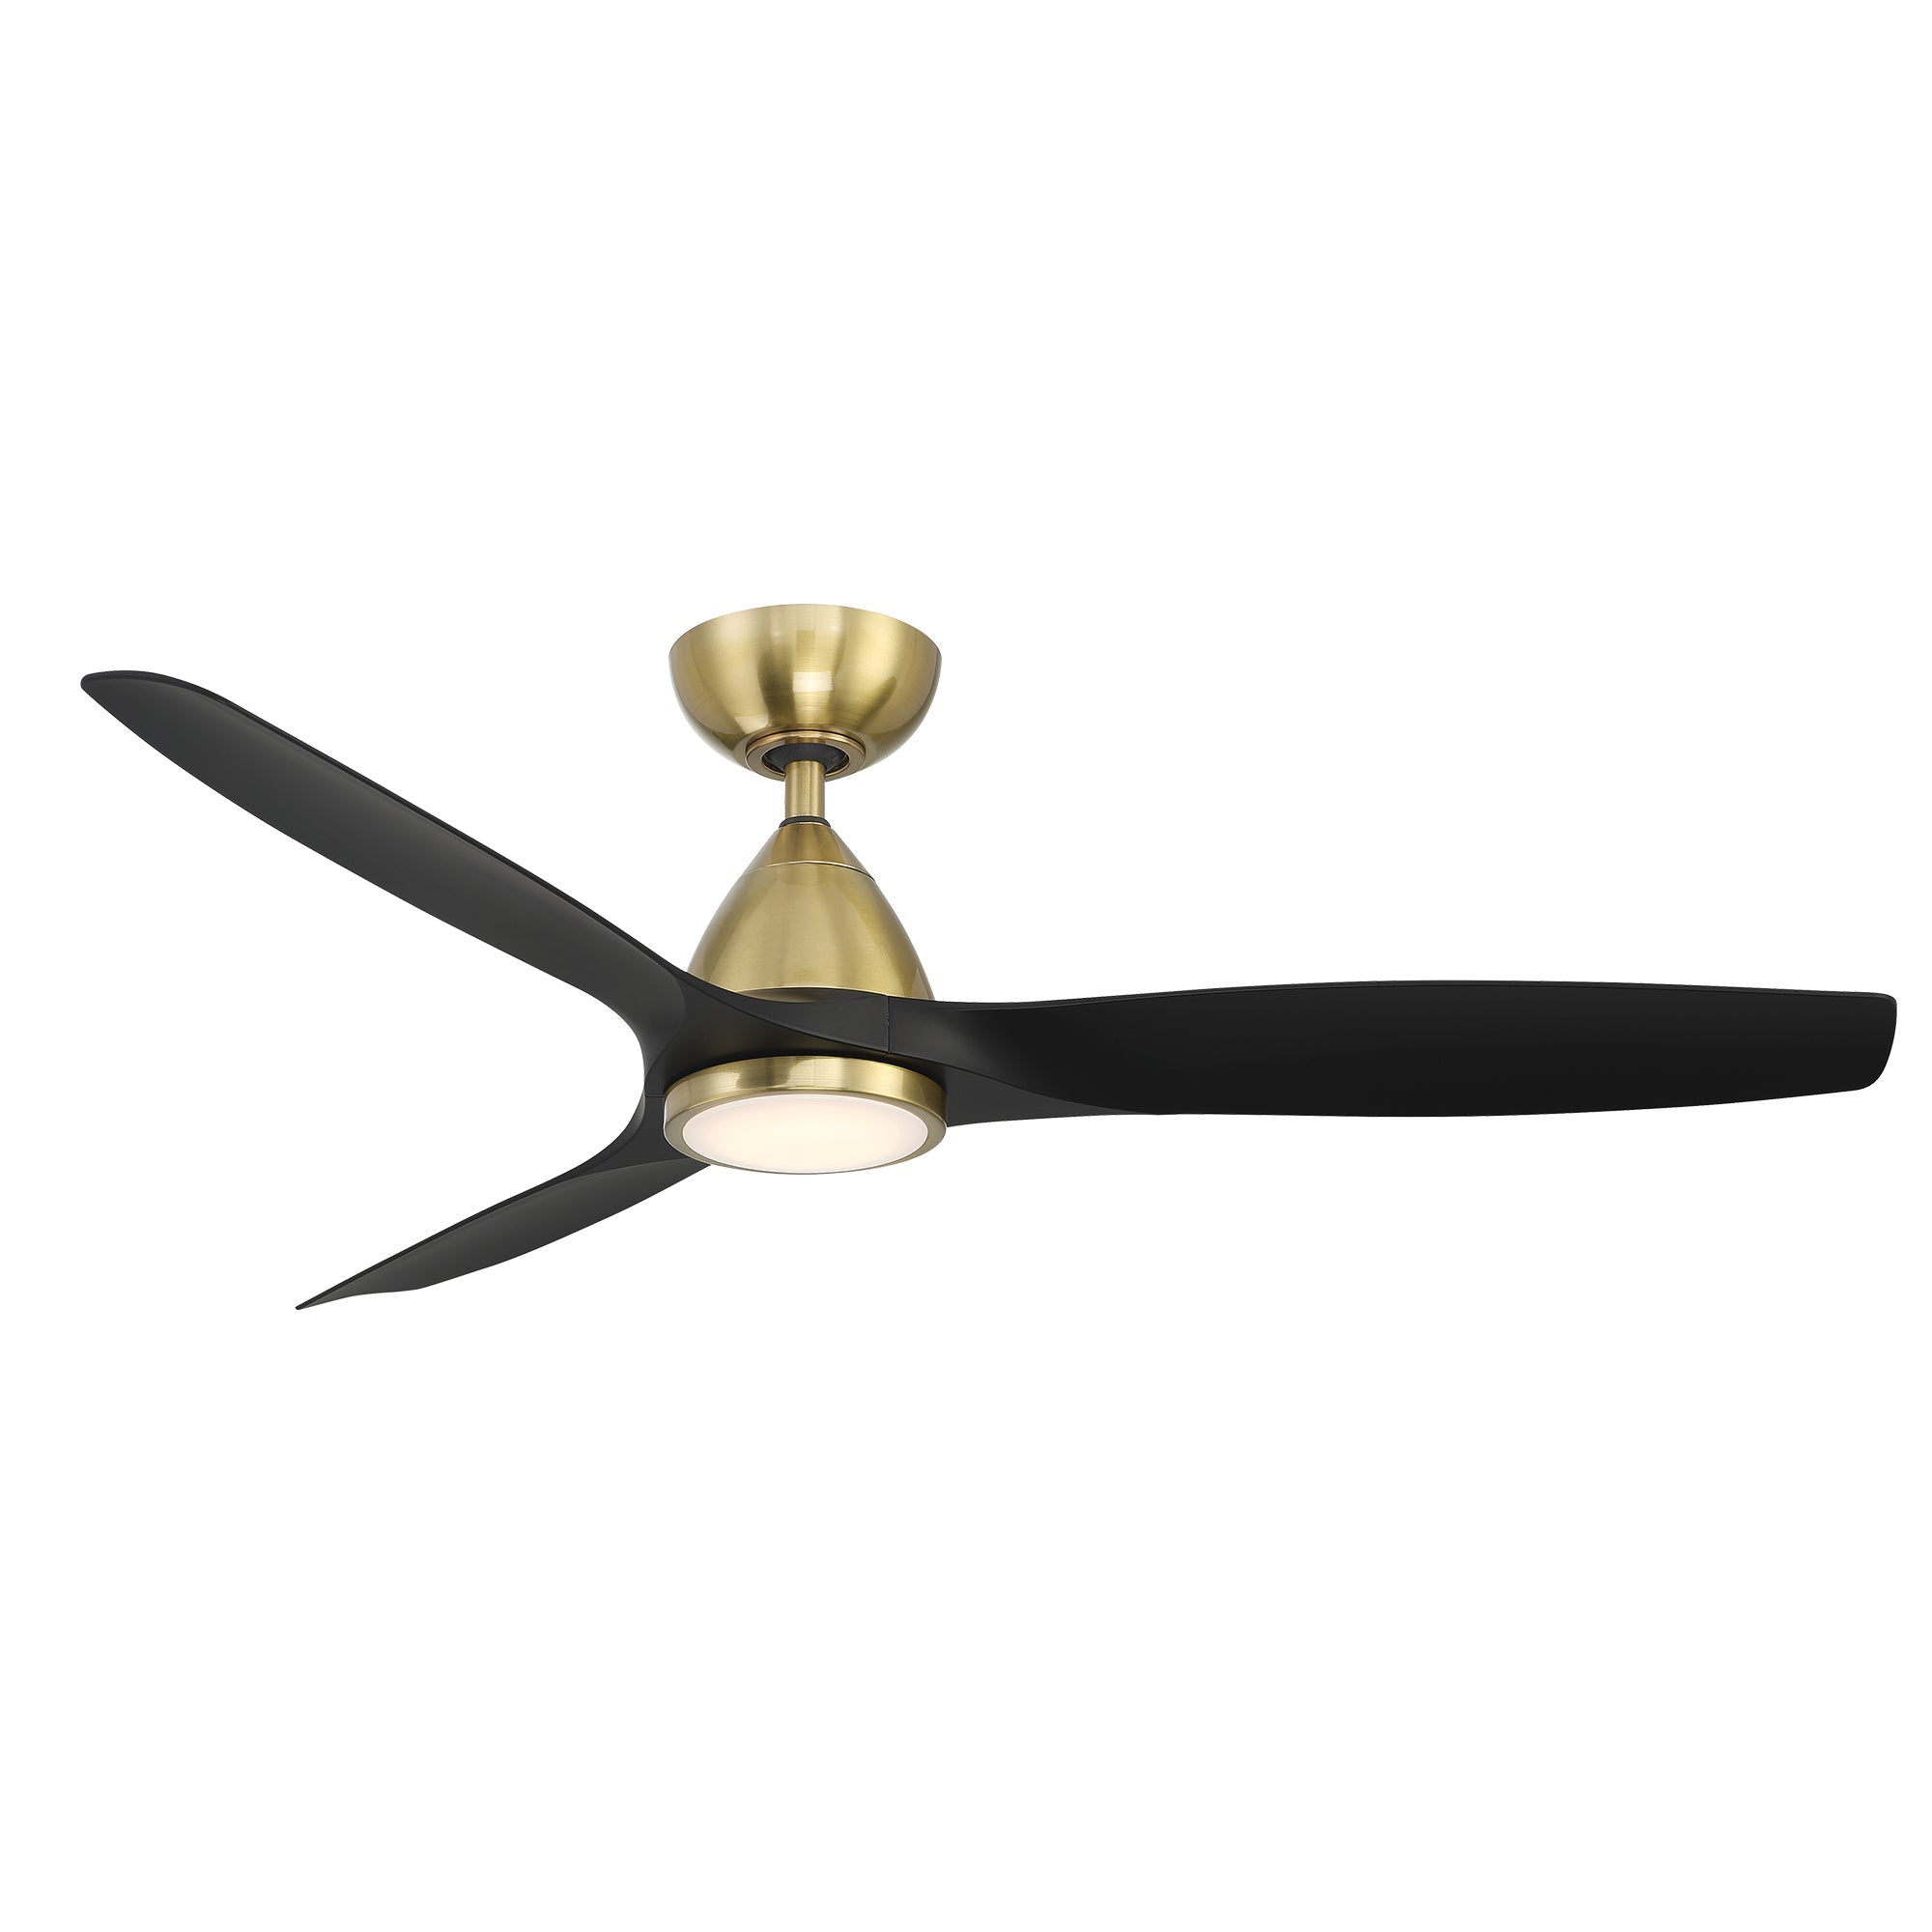 Skylark Indoor/Outdoor 3-Blade 54" Smart Ceiling Fan with LED Light Kit and Remote Control